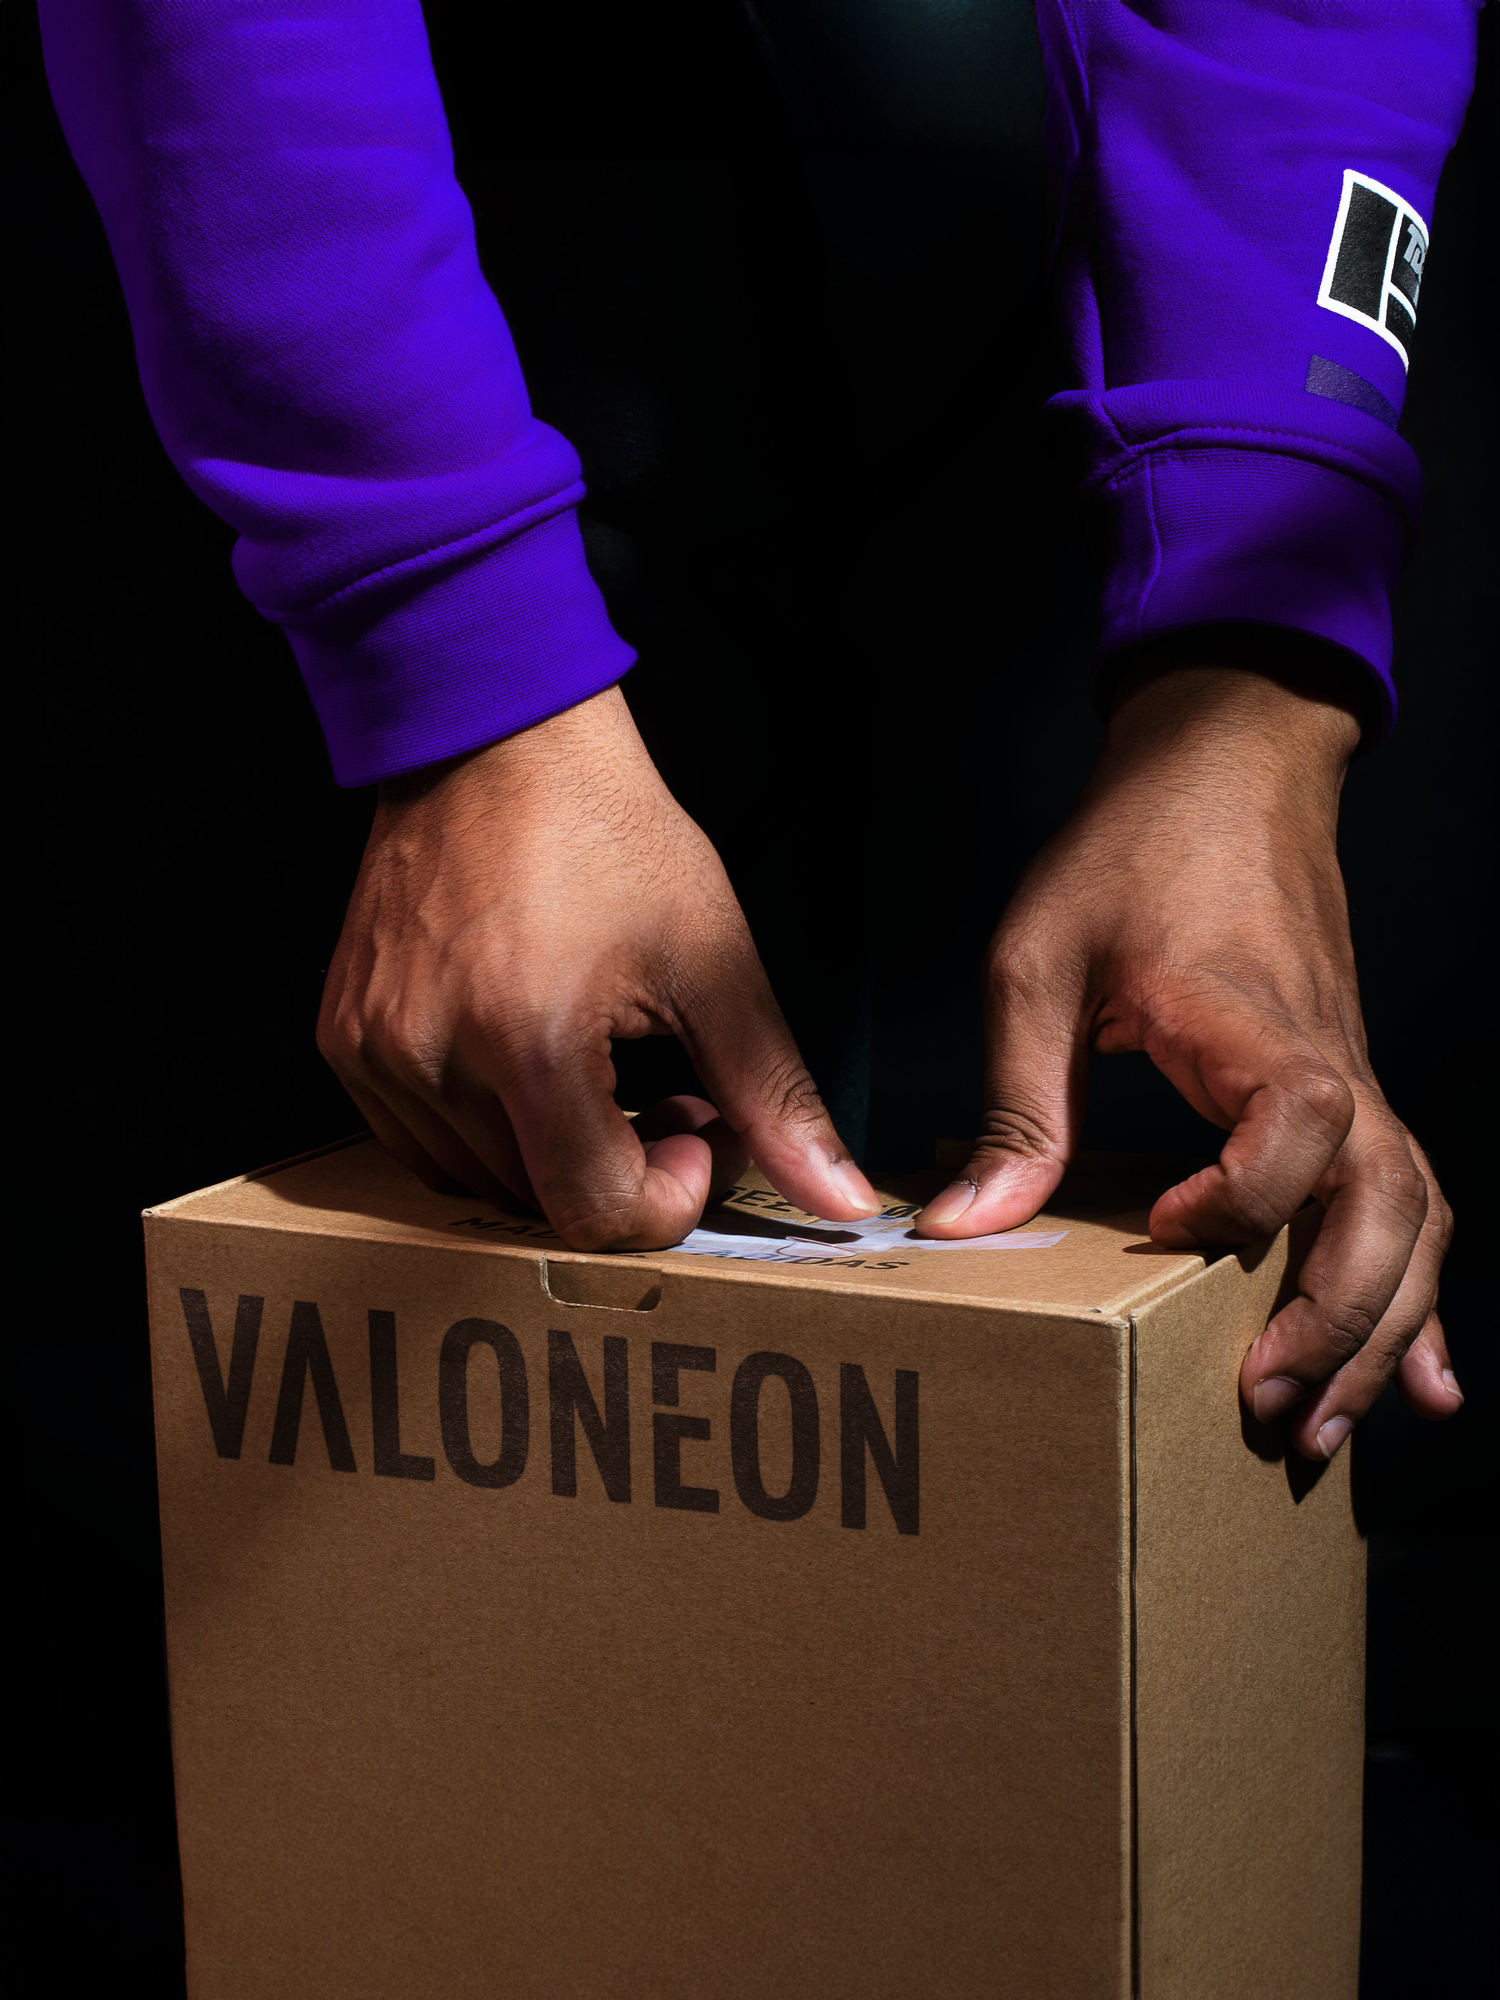 a valoneon packaging box